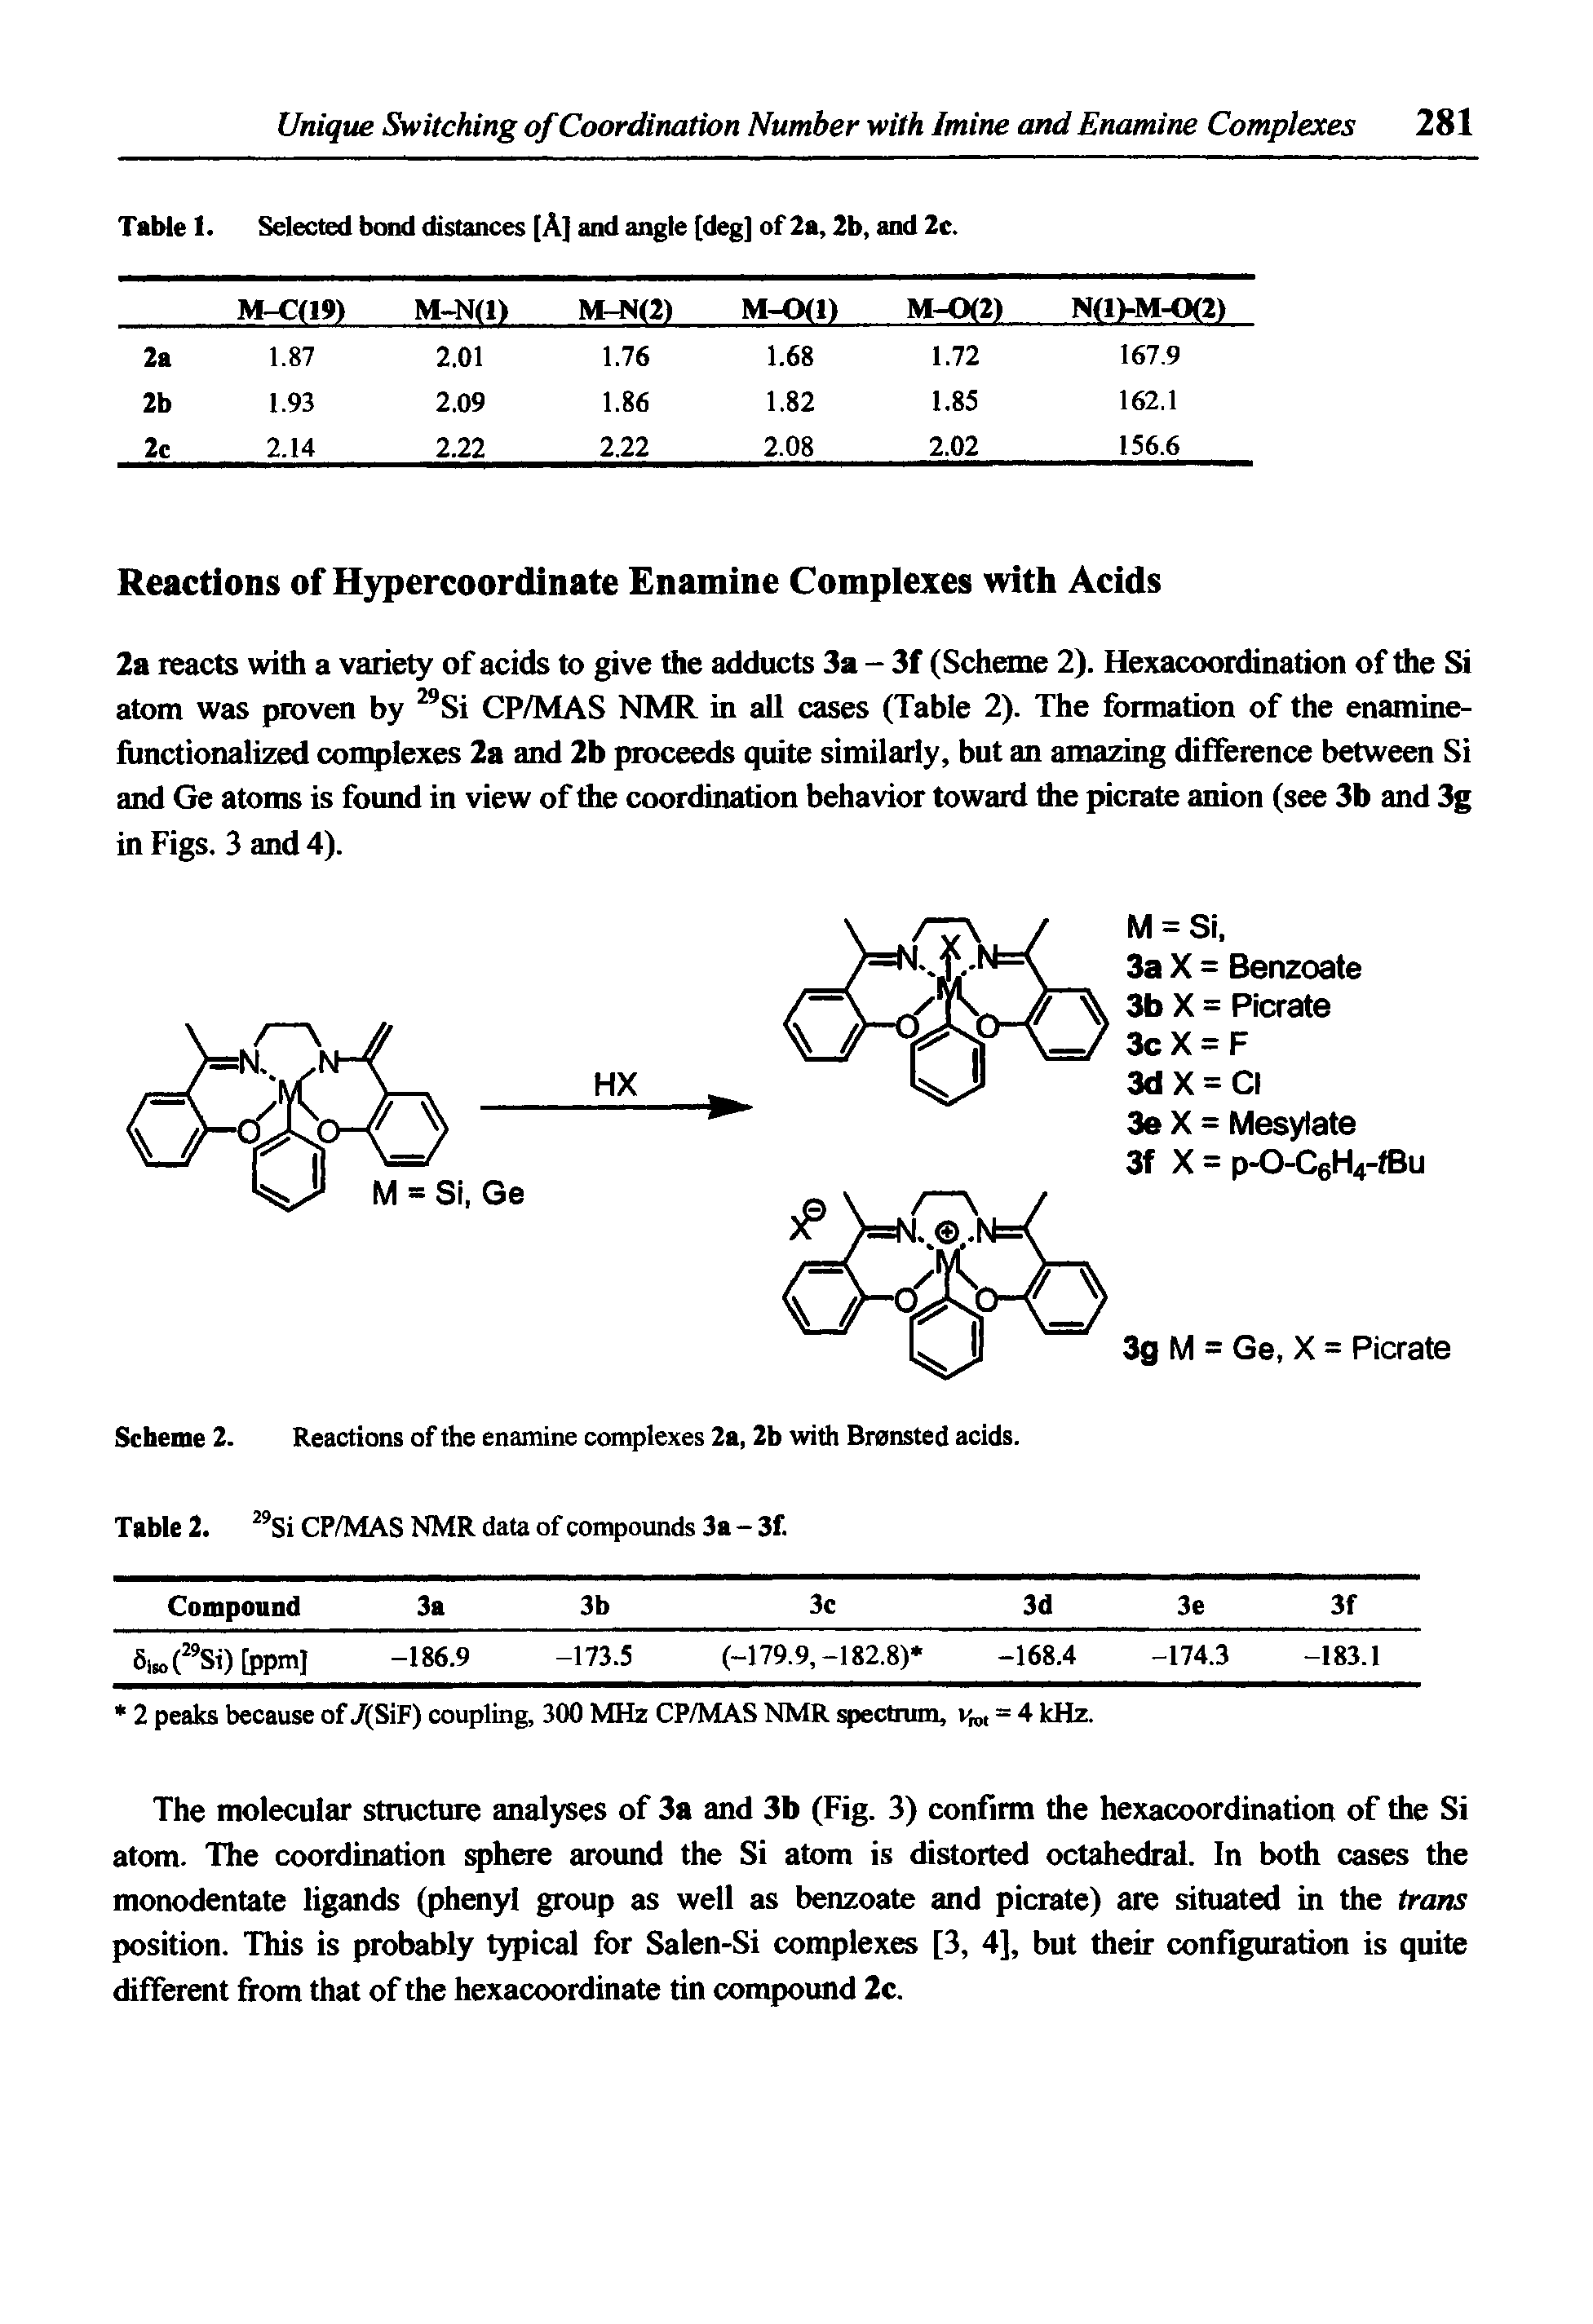 Scheme 2. Reactions of the enamine complexes 2a, 2b with Brensted acids. Table 2. Si CP/MAS NMR data of compounds 3a - 3f.